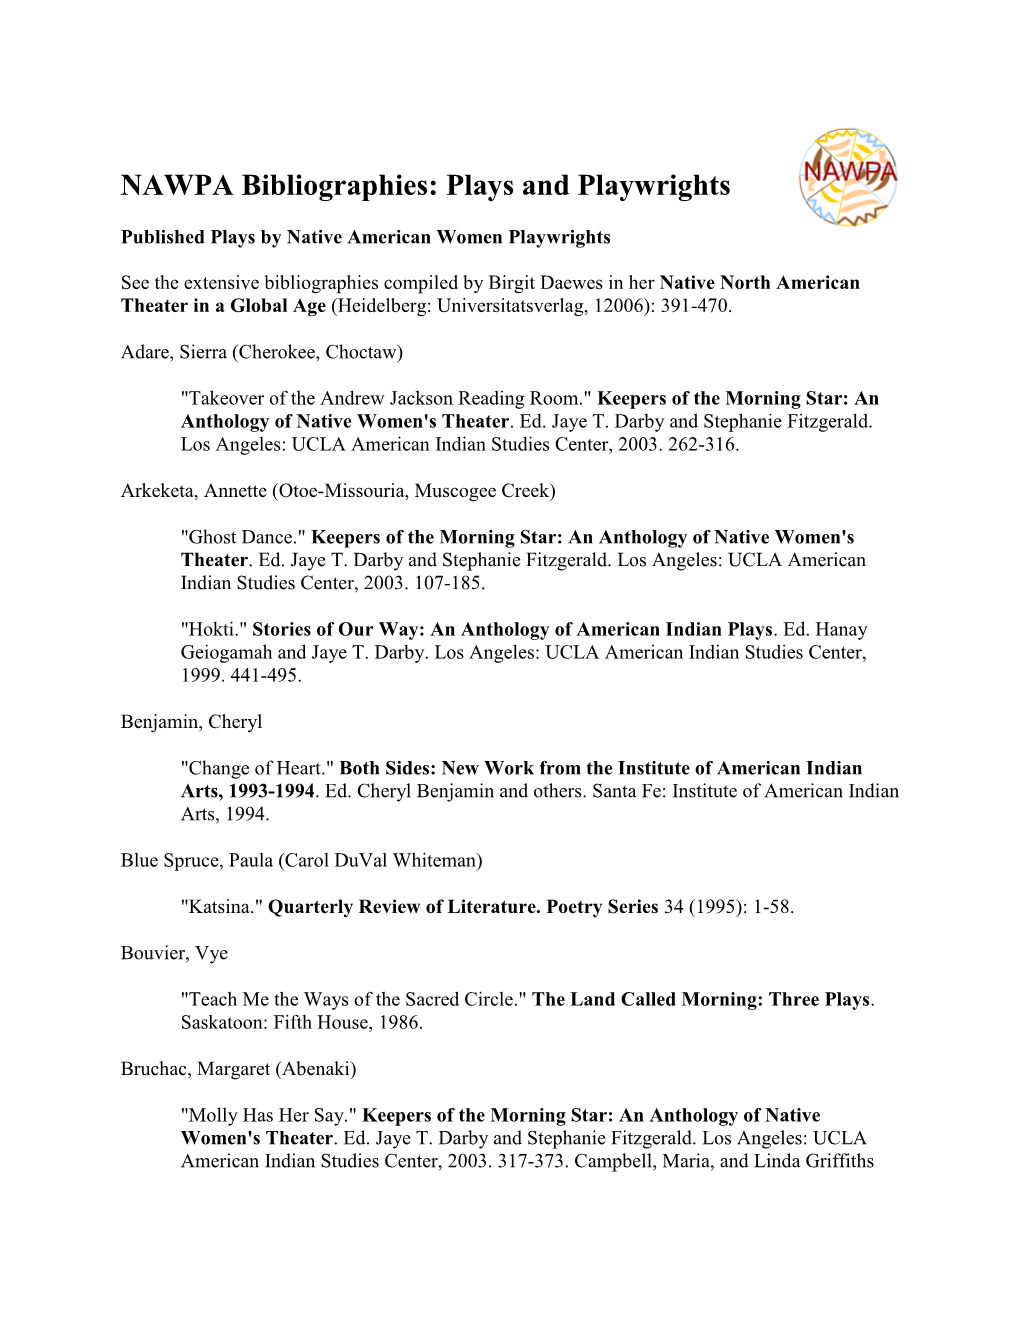 NAWPA Bibliographies: Plays and Playwrights